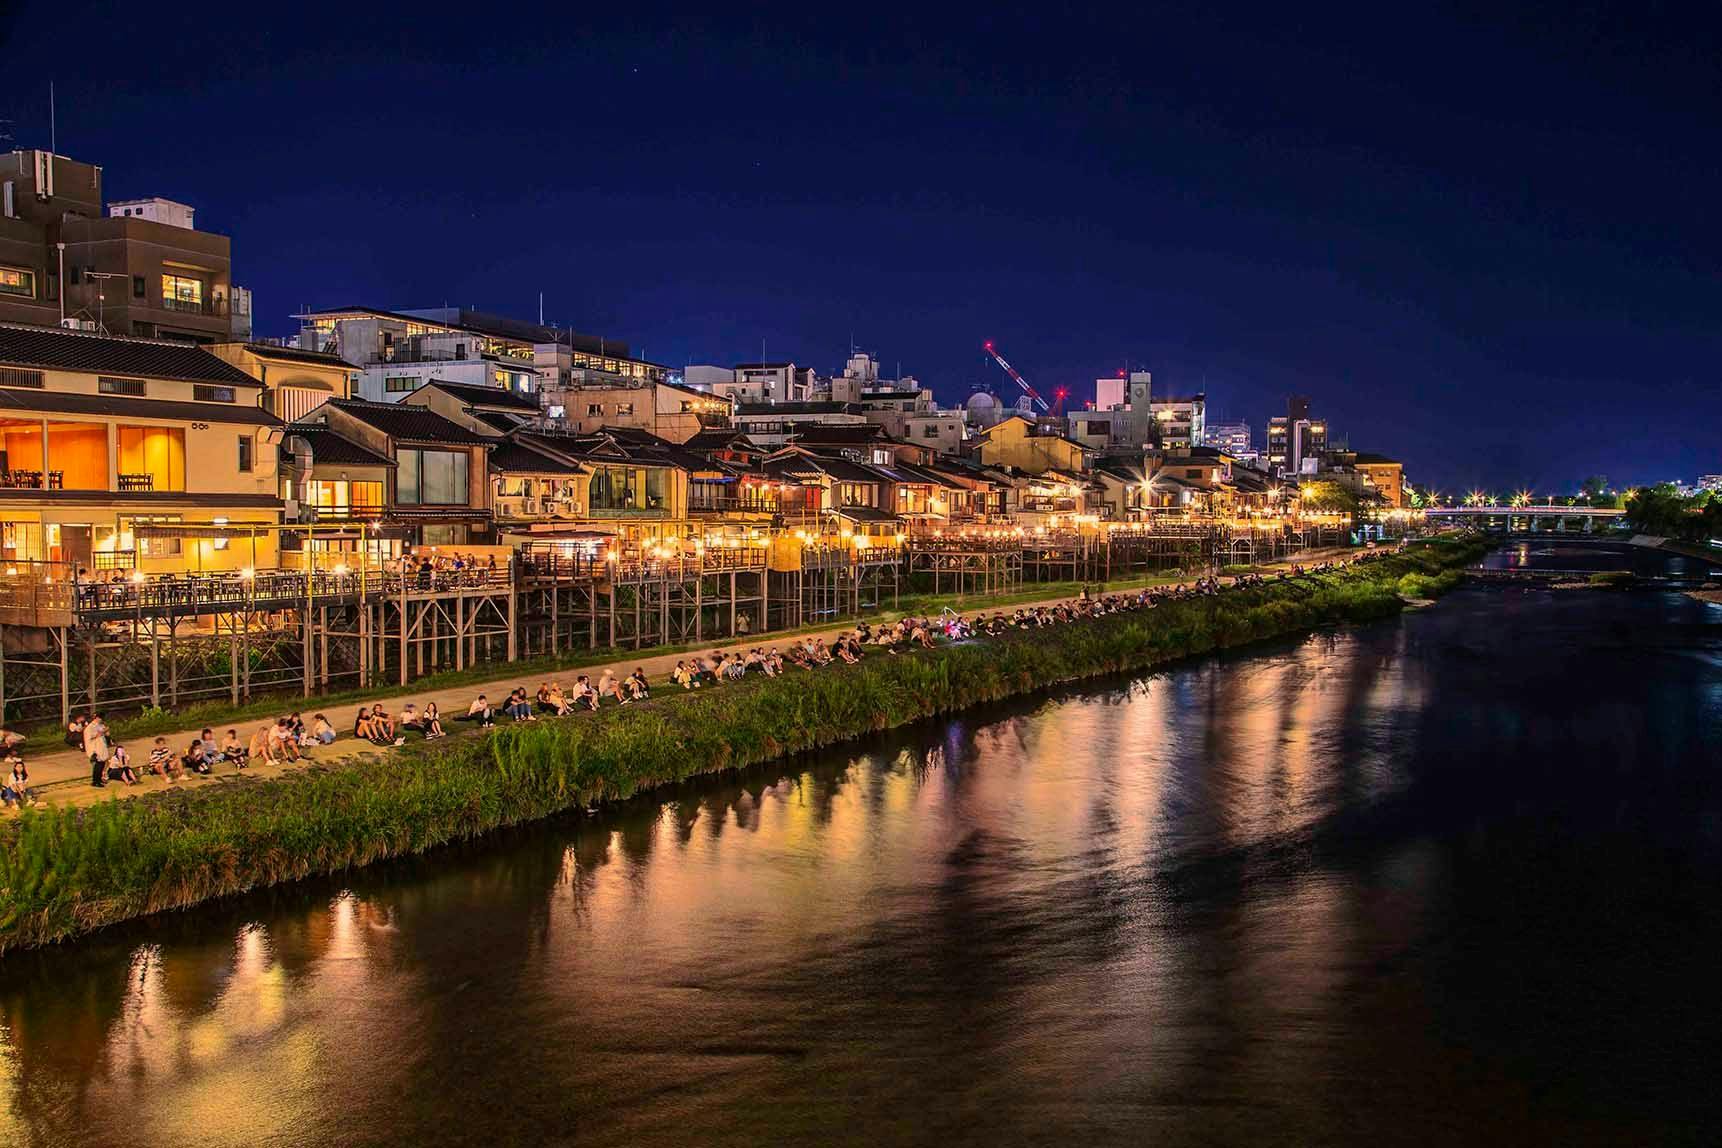 An evening shot of the banks of the Kamogawa River. Photo source: James Saunders-Wyndham